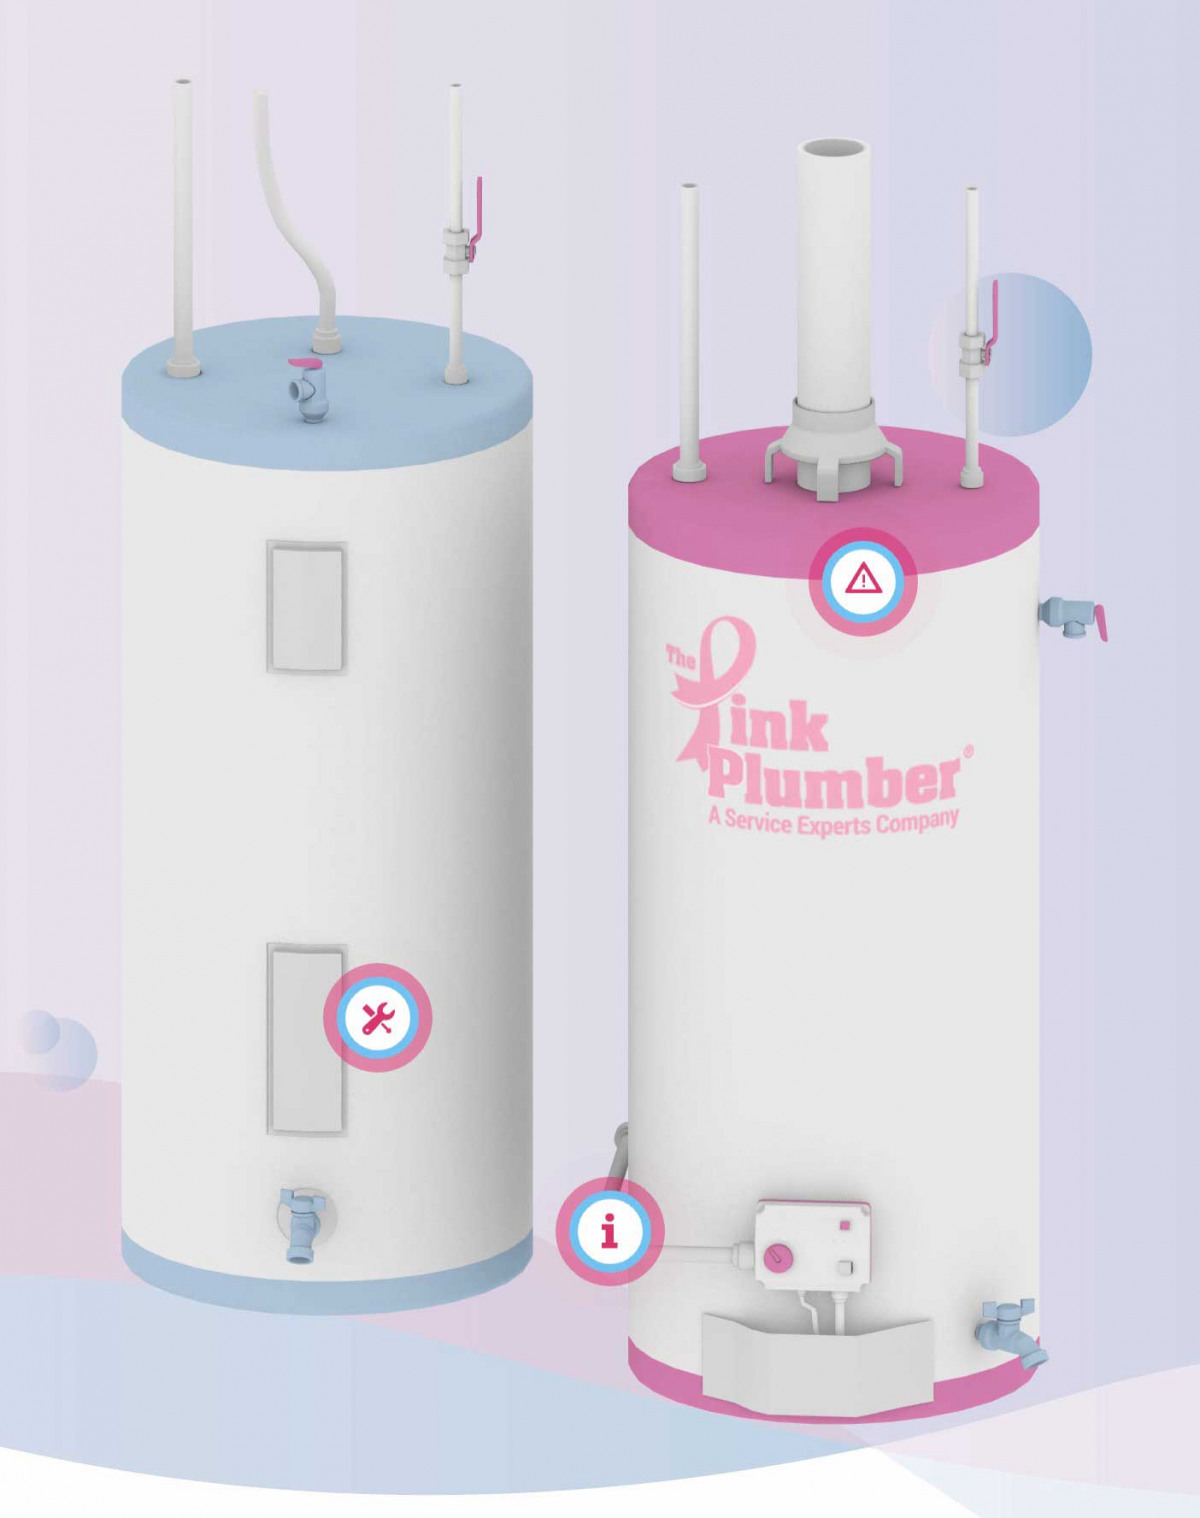 Image of website for The Pink Plumber